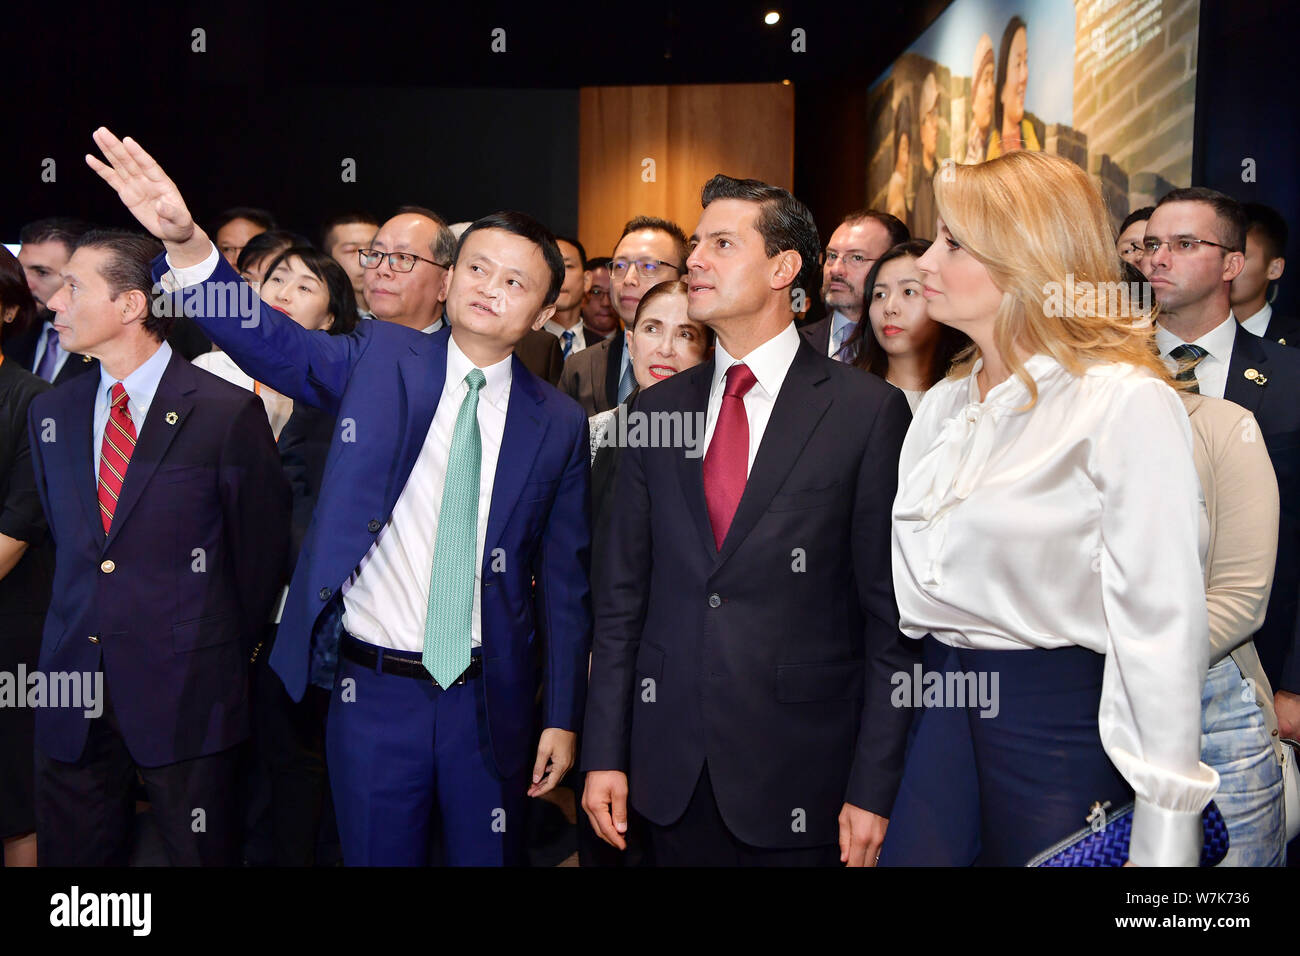 Mexican President Enrique Pena Nieto, center, and his wife Angelica Rivera visit the Alibaba headquarters with Jack Ma or Ma Yun, second left, chairma Stock Photo